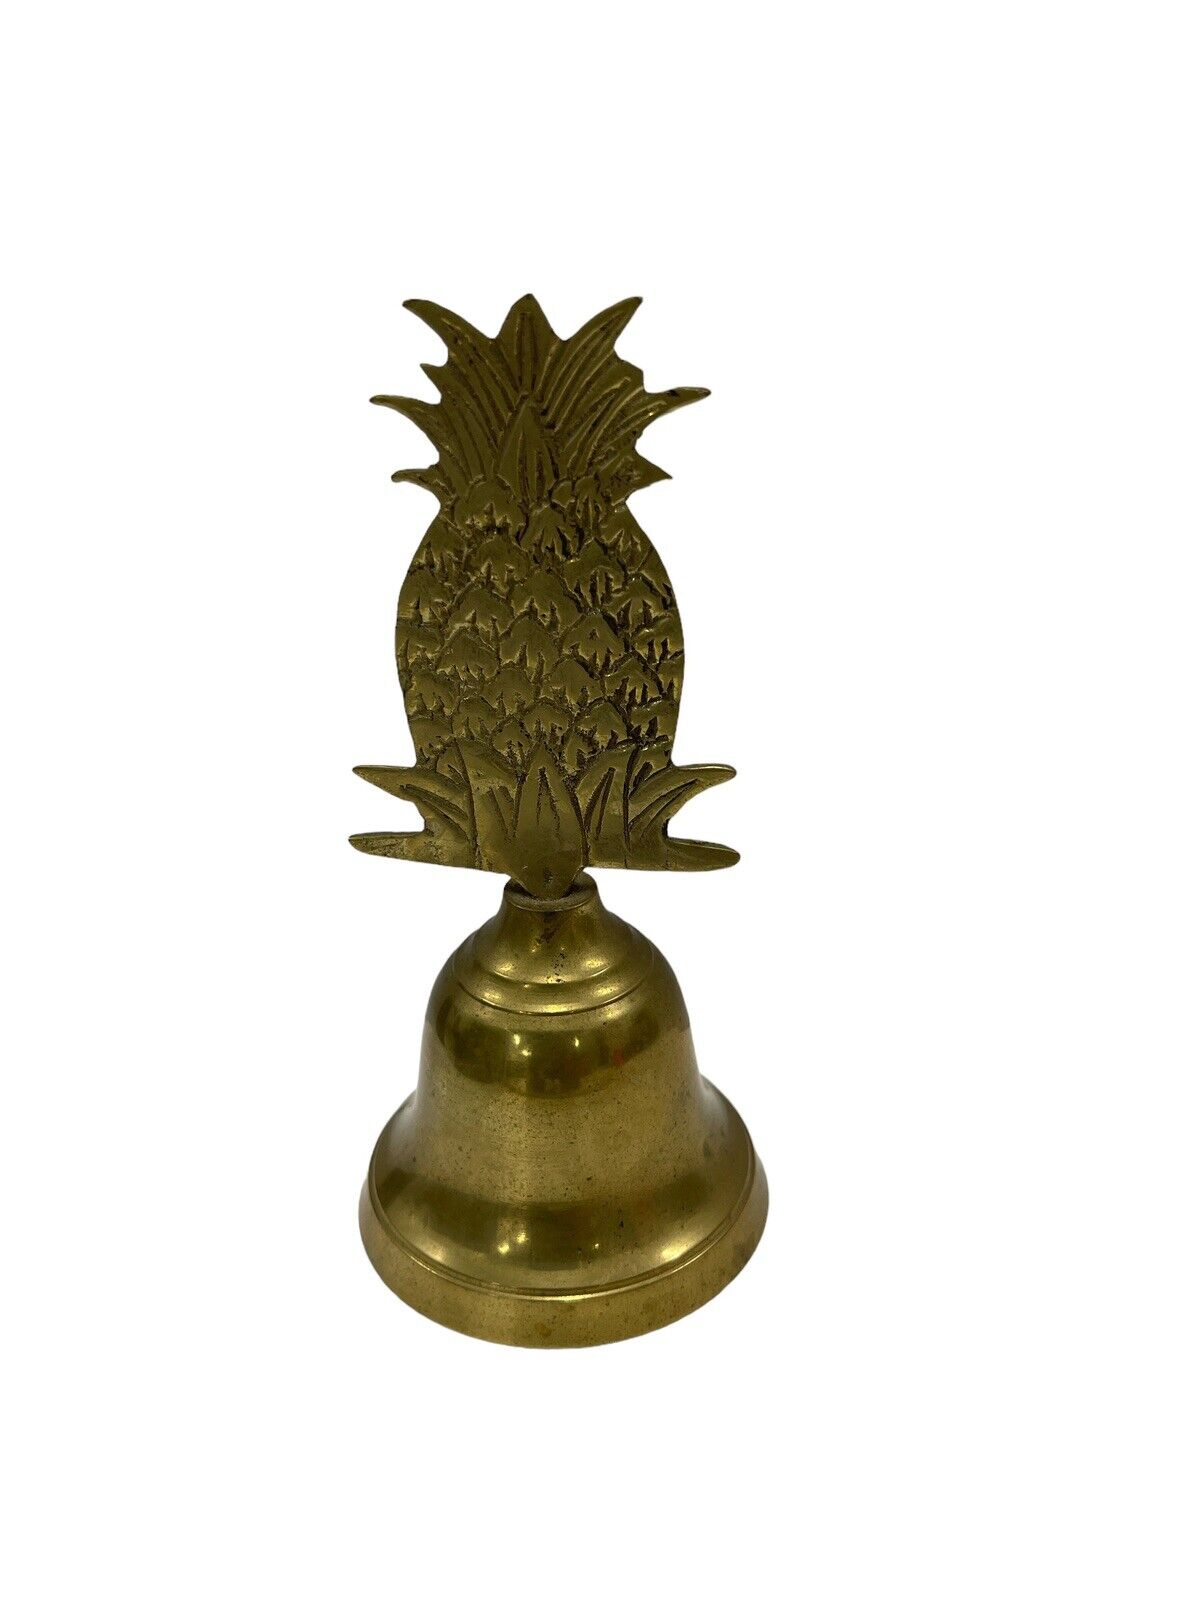 VINTAGE 5.5” SOLID BRASS BELL WITH PINEAPPLE HANDLE Tropical